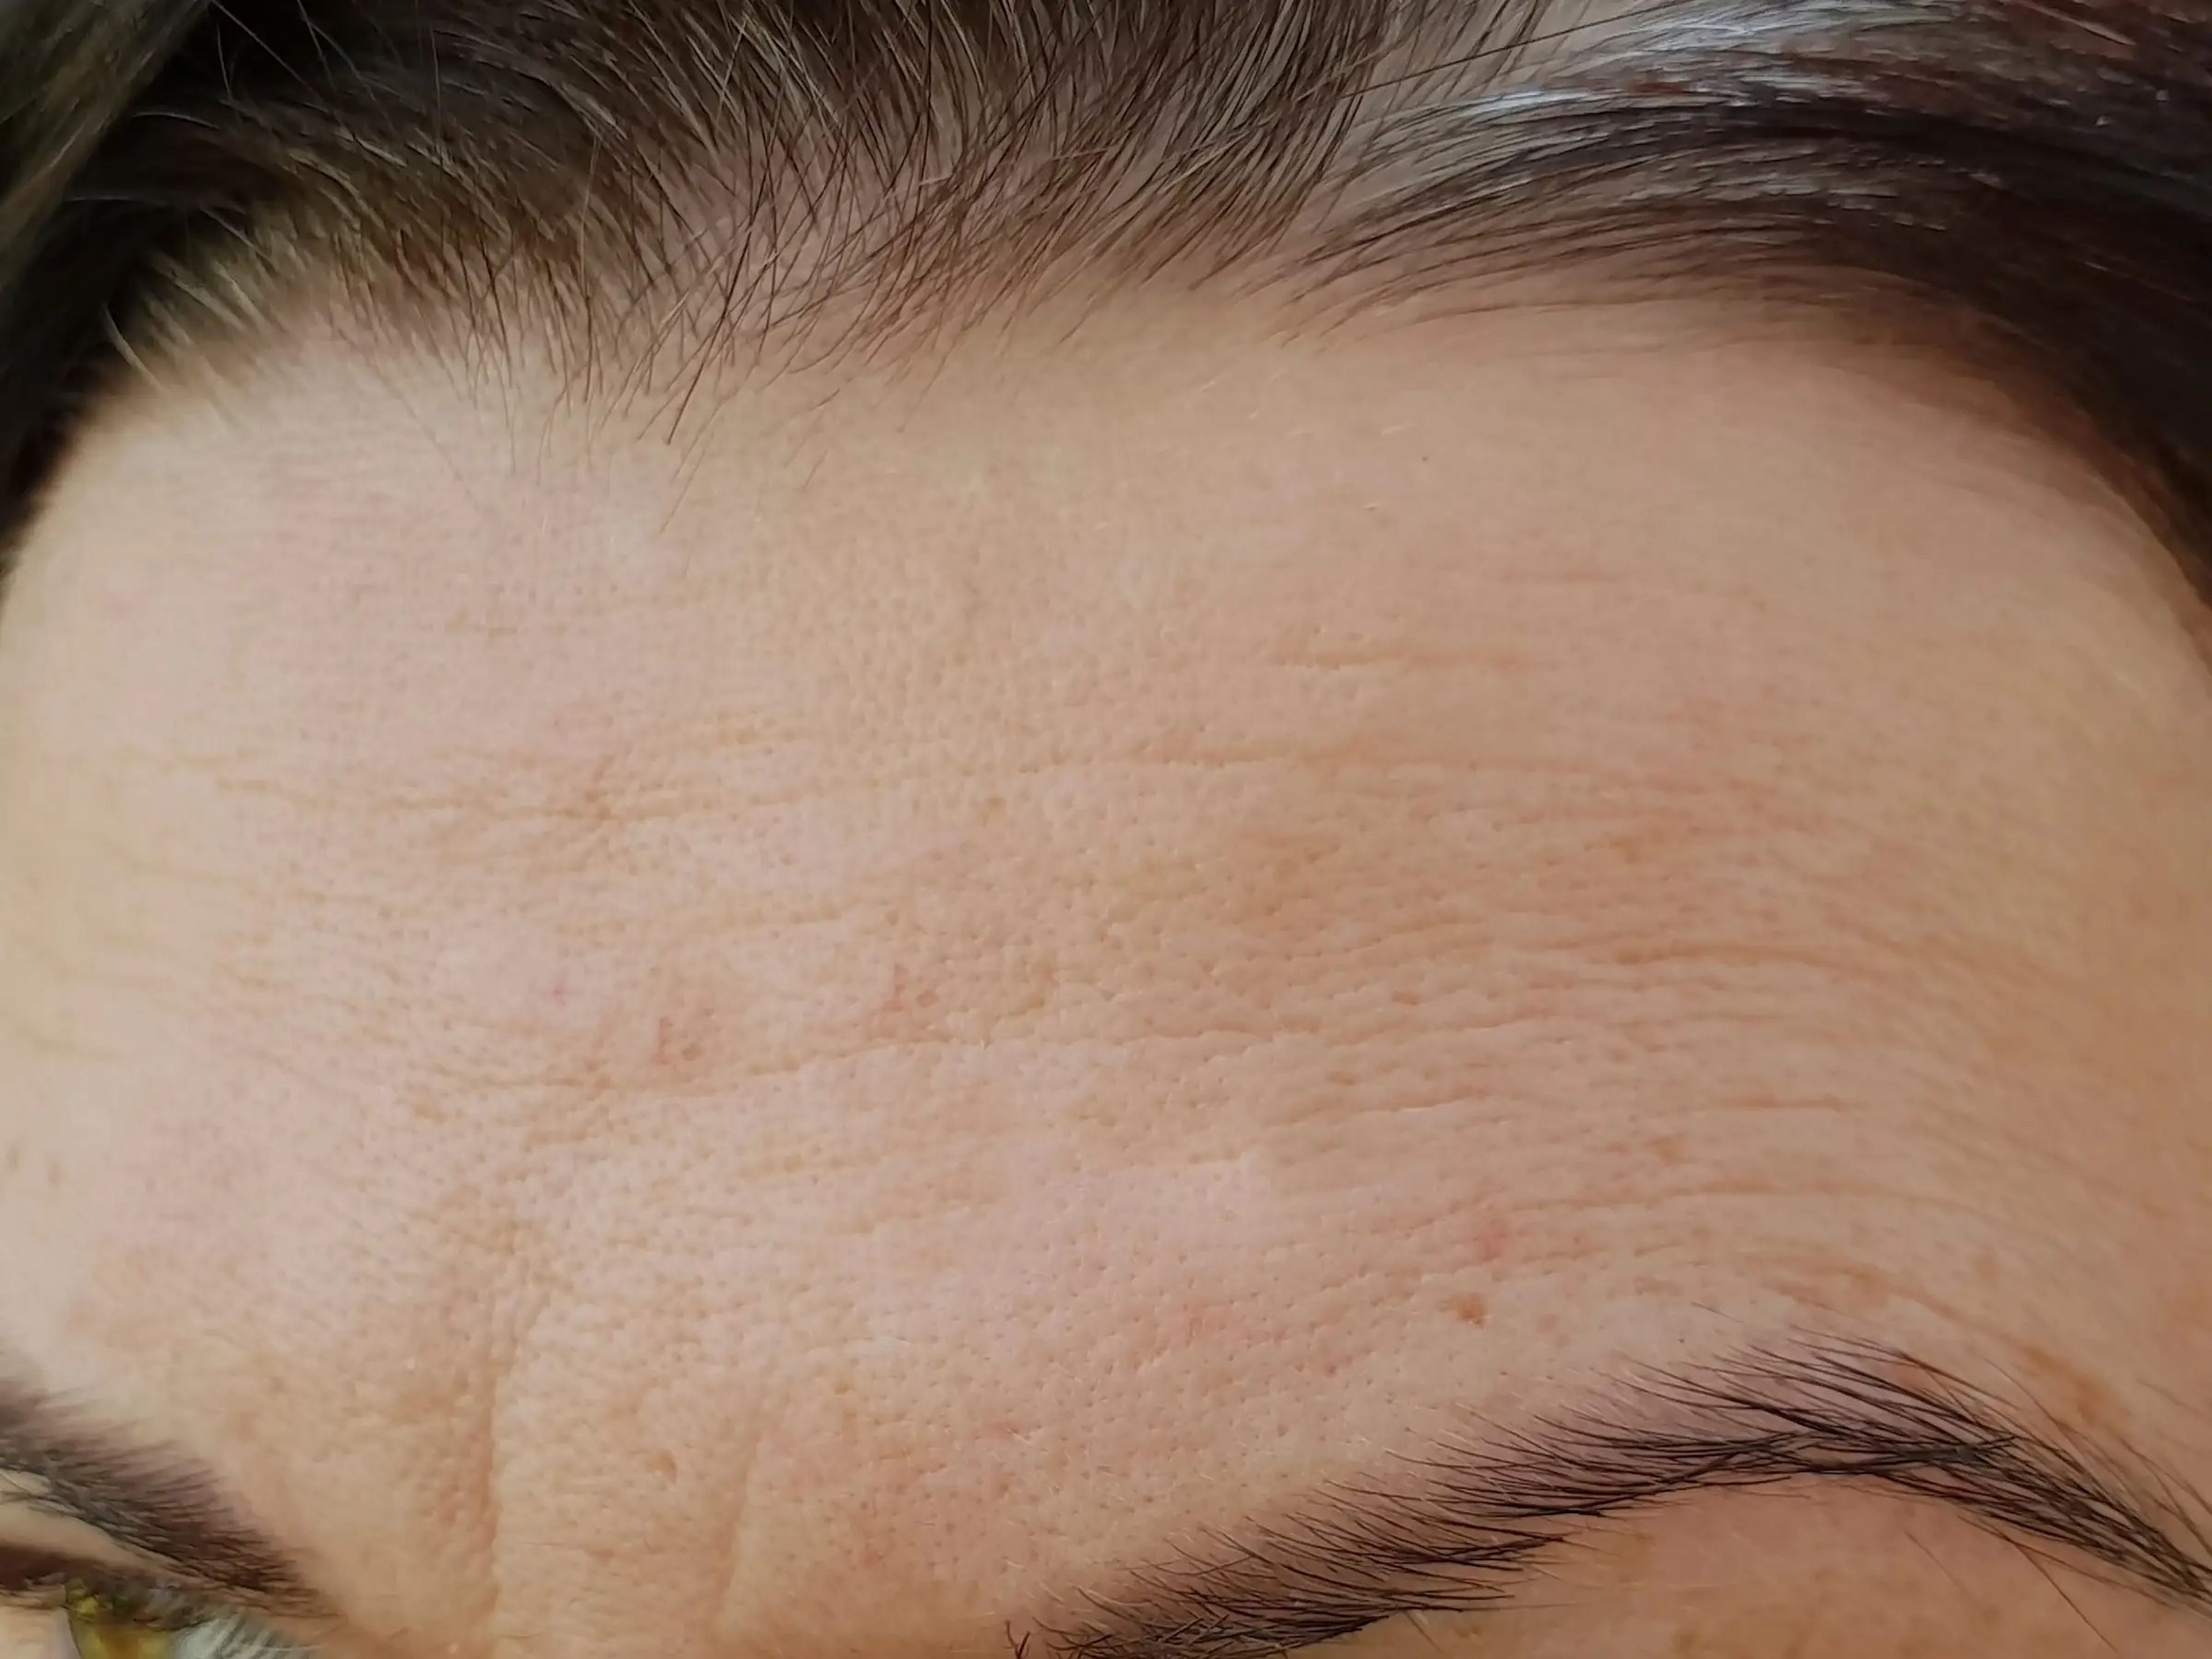 A woman's forehead with dehydration lines